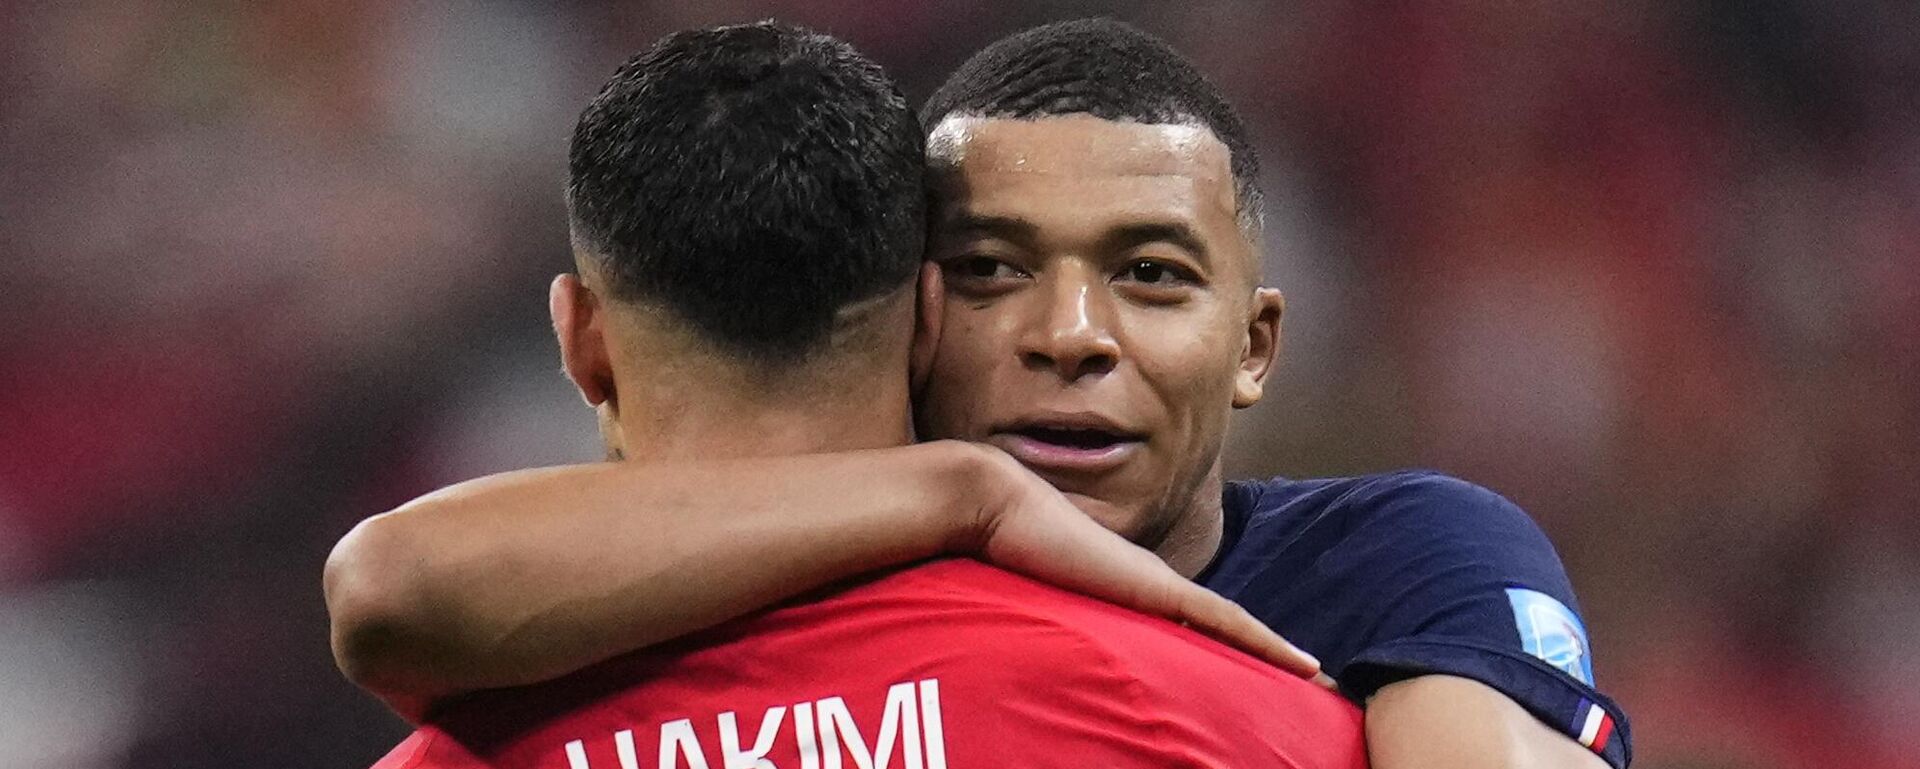 France's Kylian Mbappe hugs Morocco's Achraf Hakimi at the end of the World Cup semifinal soccer match between France and Morocco at the Al Bayt Stadium in Al Khor, Qatar, Wednesday, Dec. 14, 2022. - Sputnik India, 1920, 15.12.2022